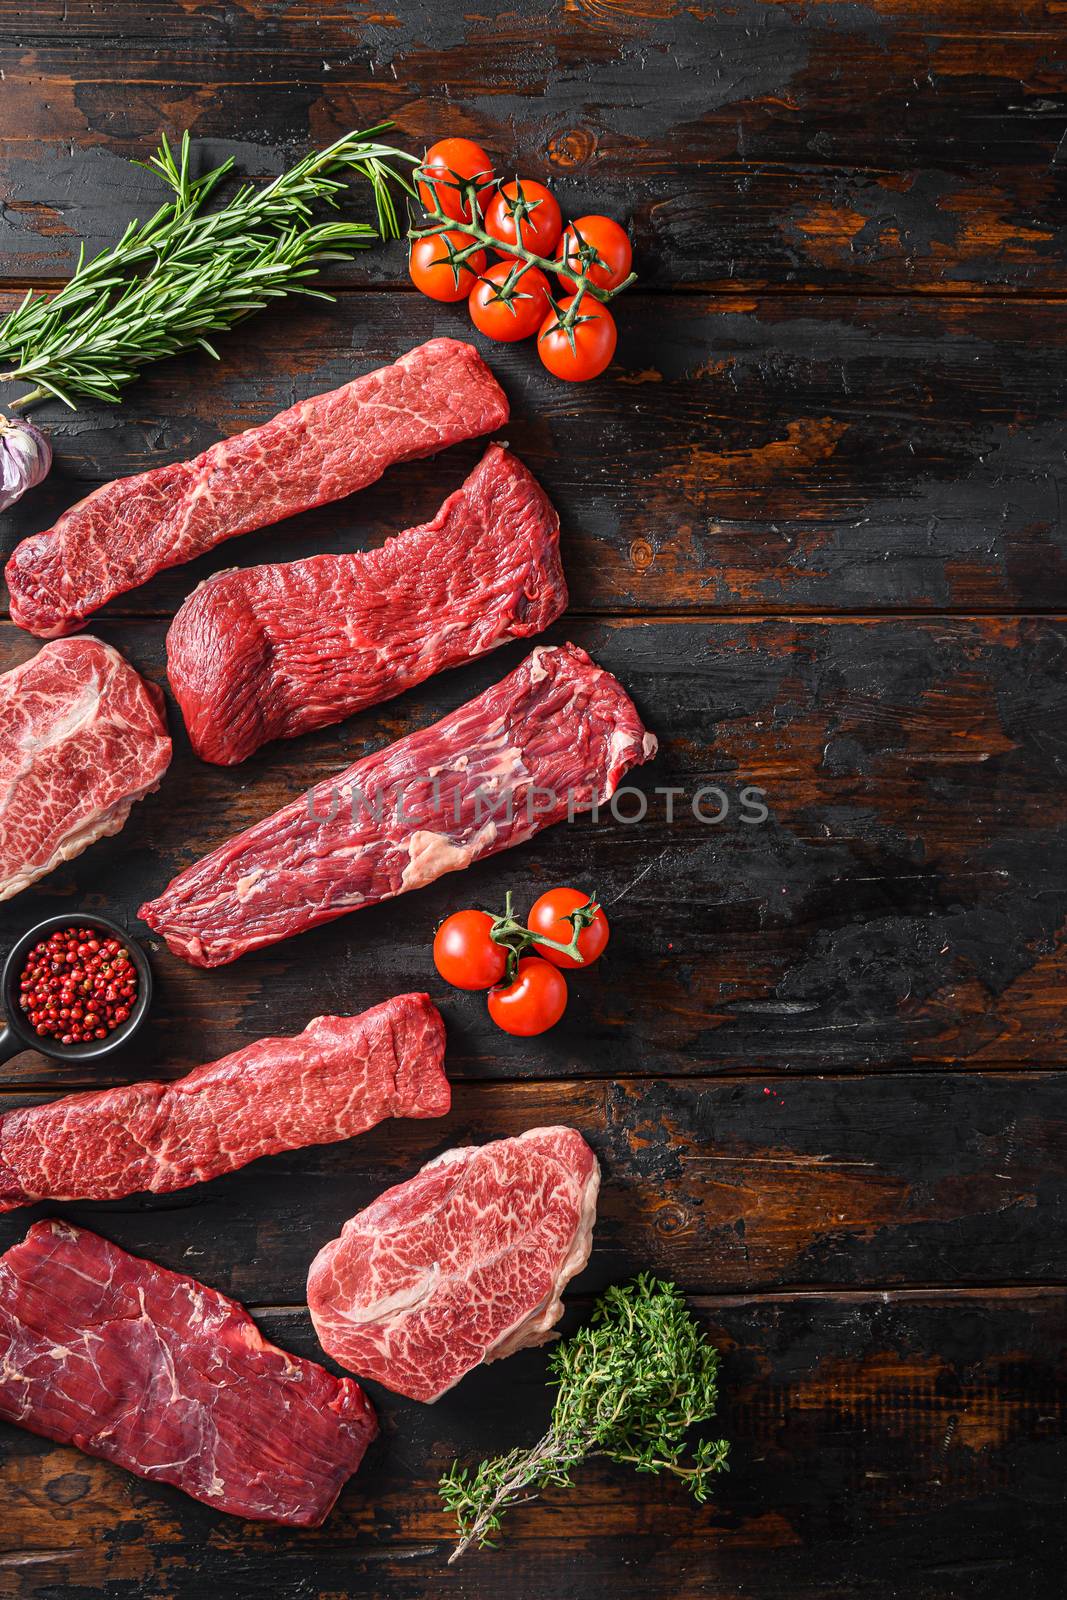 Set of flap flank Steak, machete steak or skirt cut, Top blade or flat iron beef and tri tip, triangle roast with denver cut top view over old butcher wood table vertical space for text by Ilianesolenyi